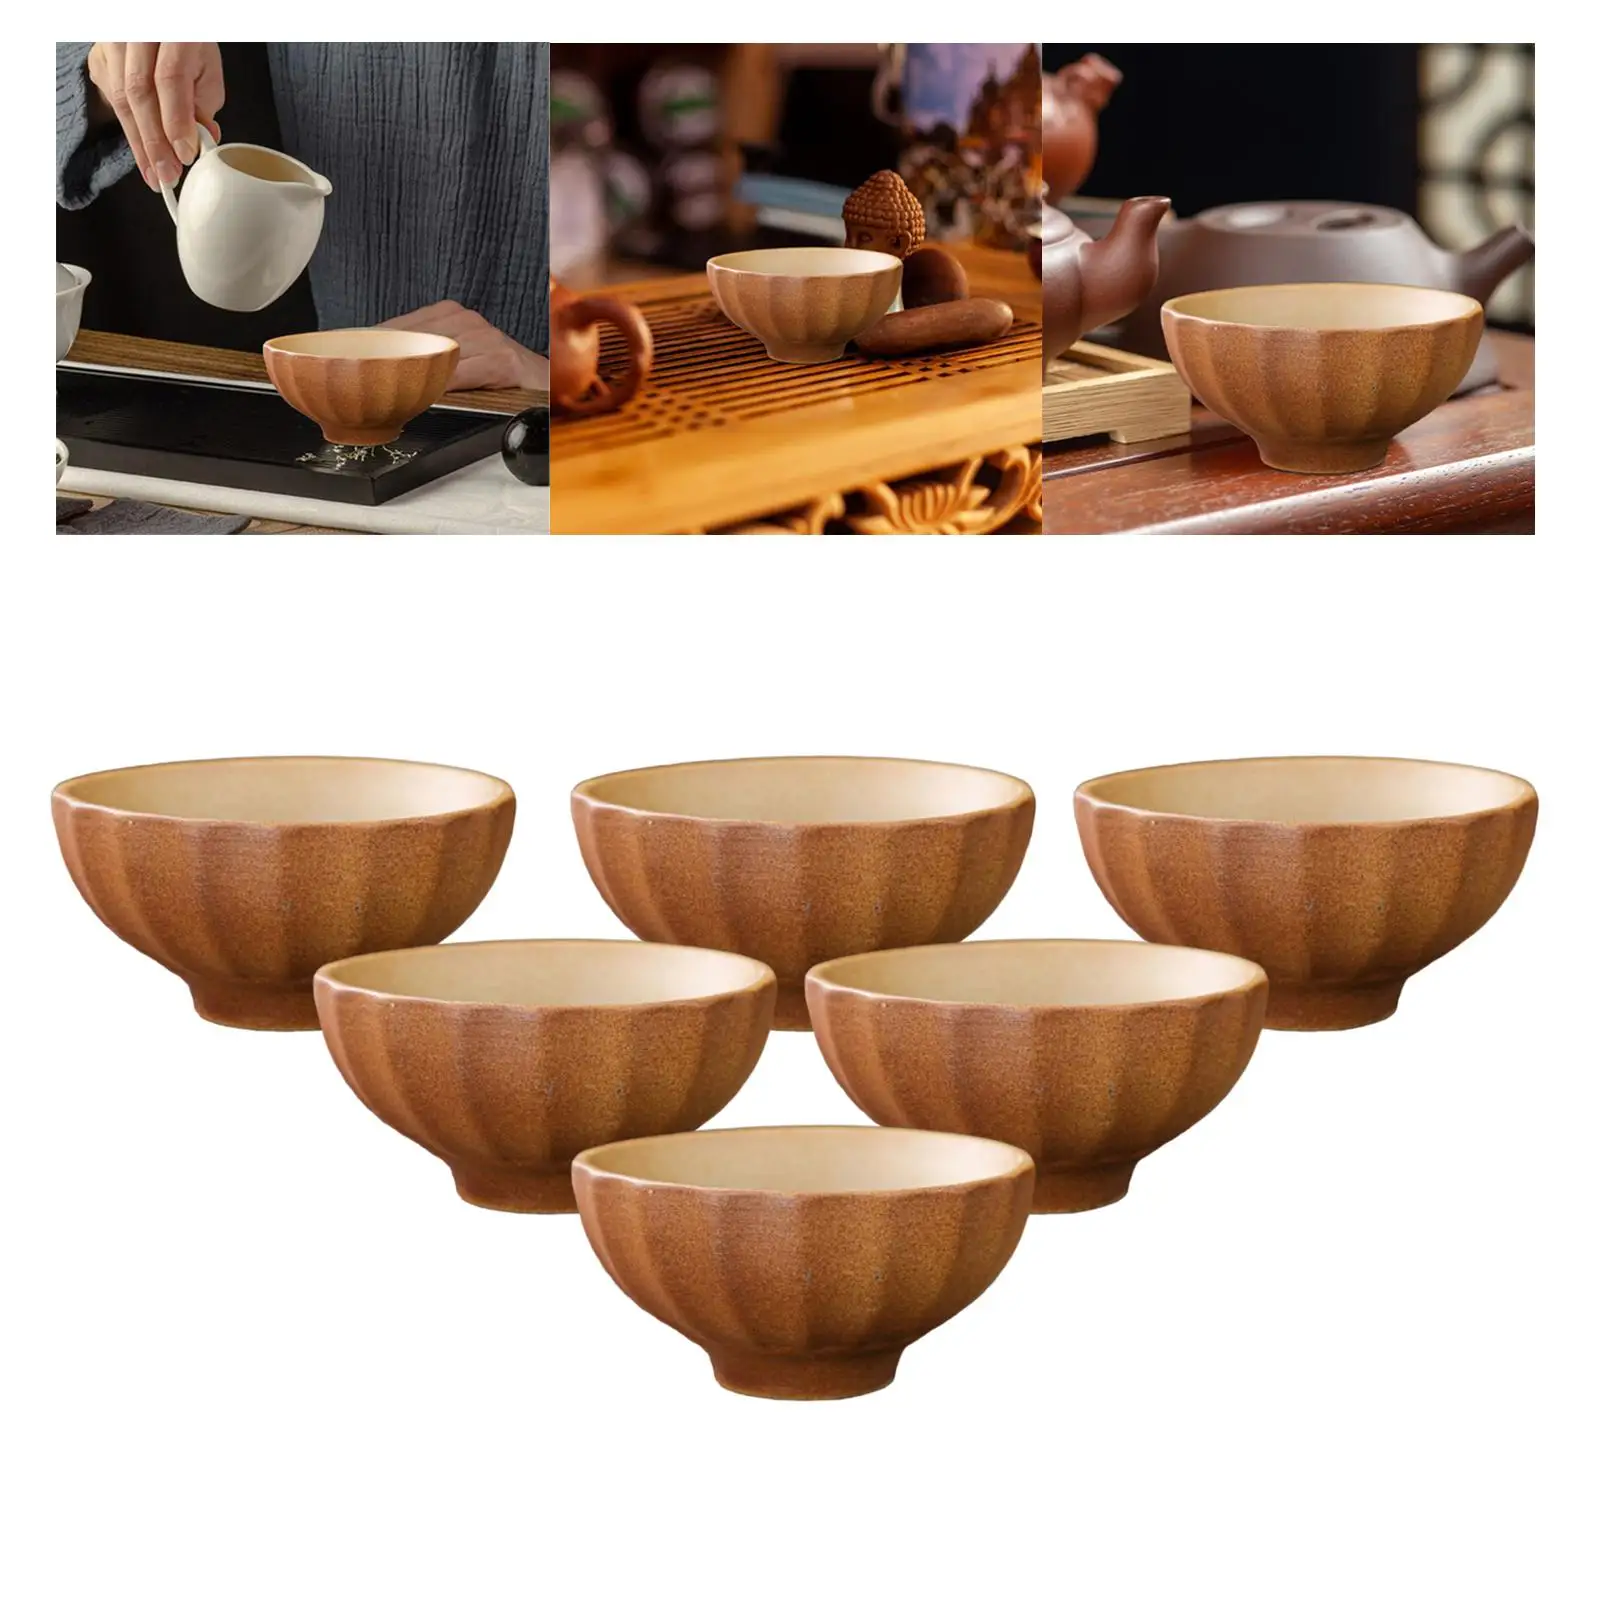 6x Japanese Cup Set Multipurpose Portable Drinkware Japanese Sake Cups for Home Tea Ceremony Party Restaurant Coffee Shop Latte